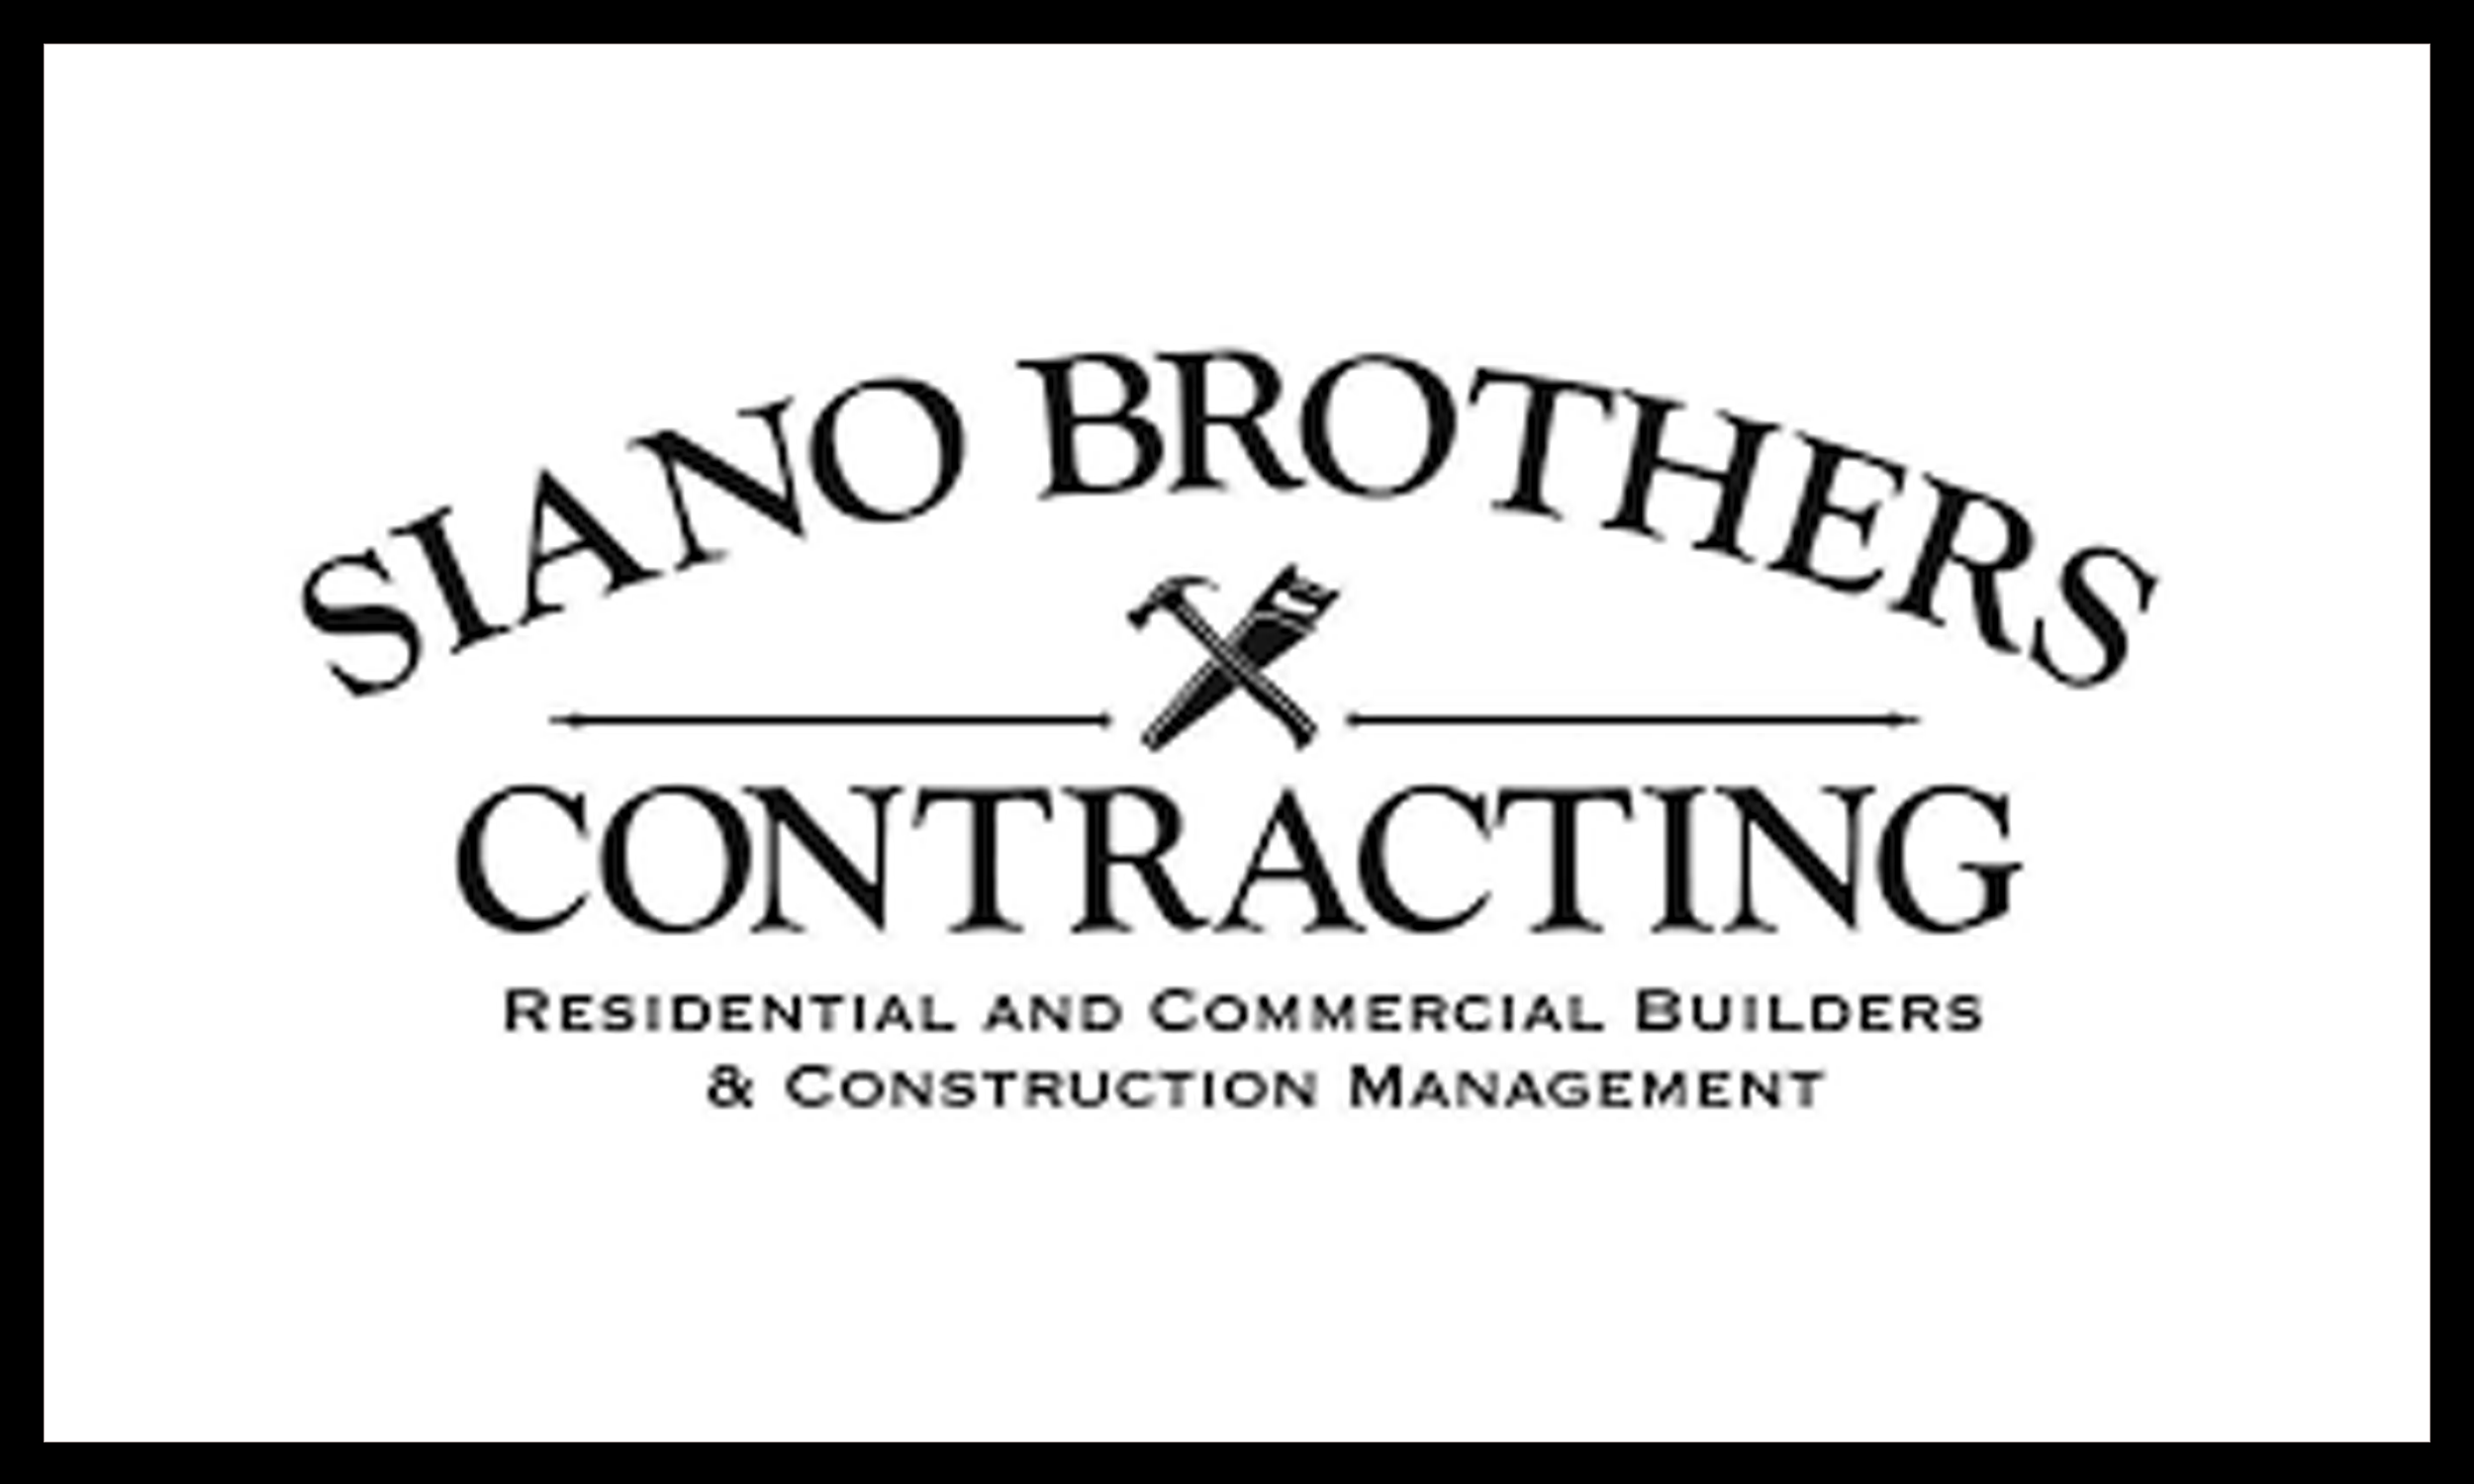 Siano Brothers Contracting